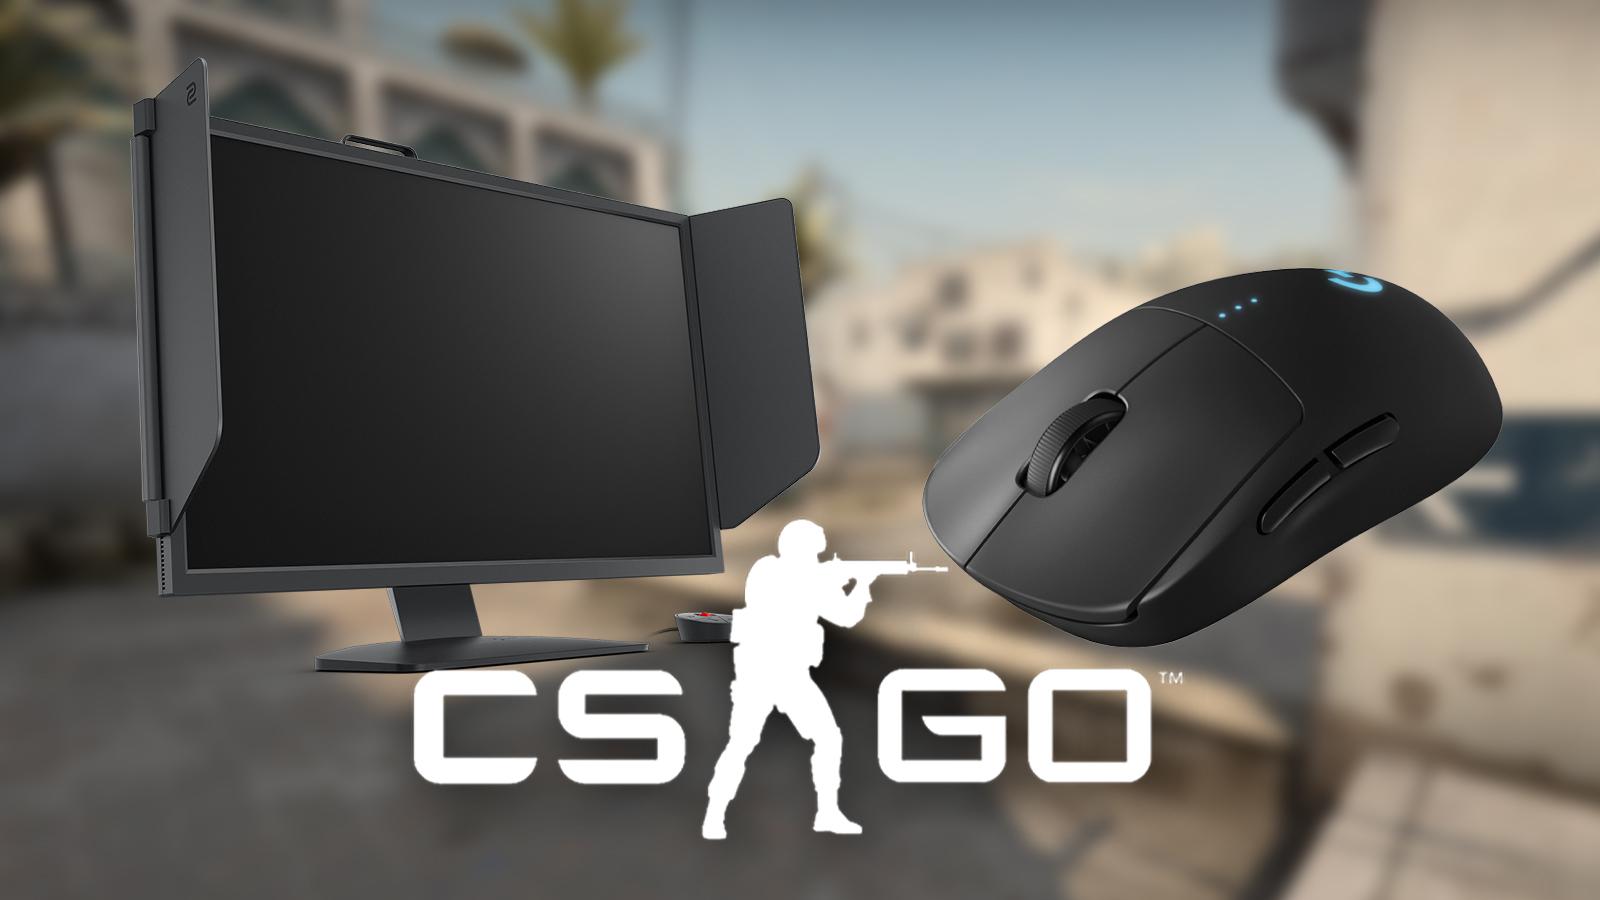 csgo best mouse keyboard monitor